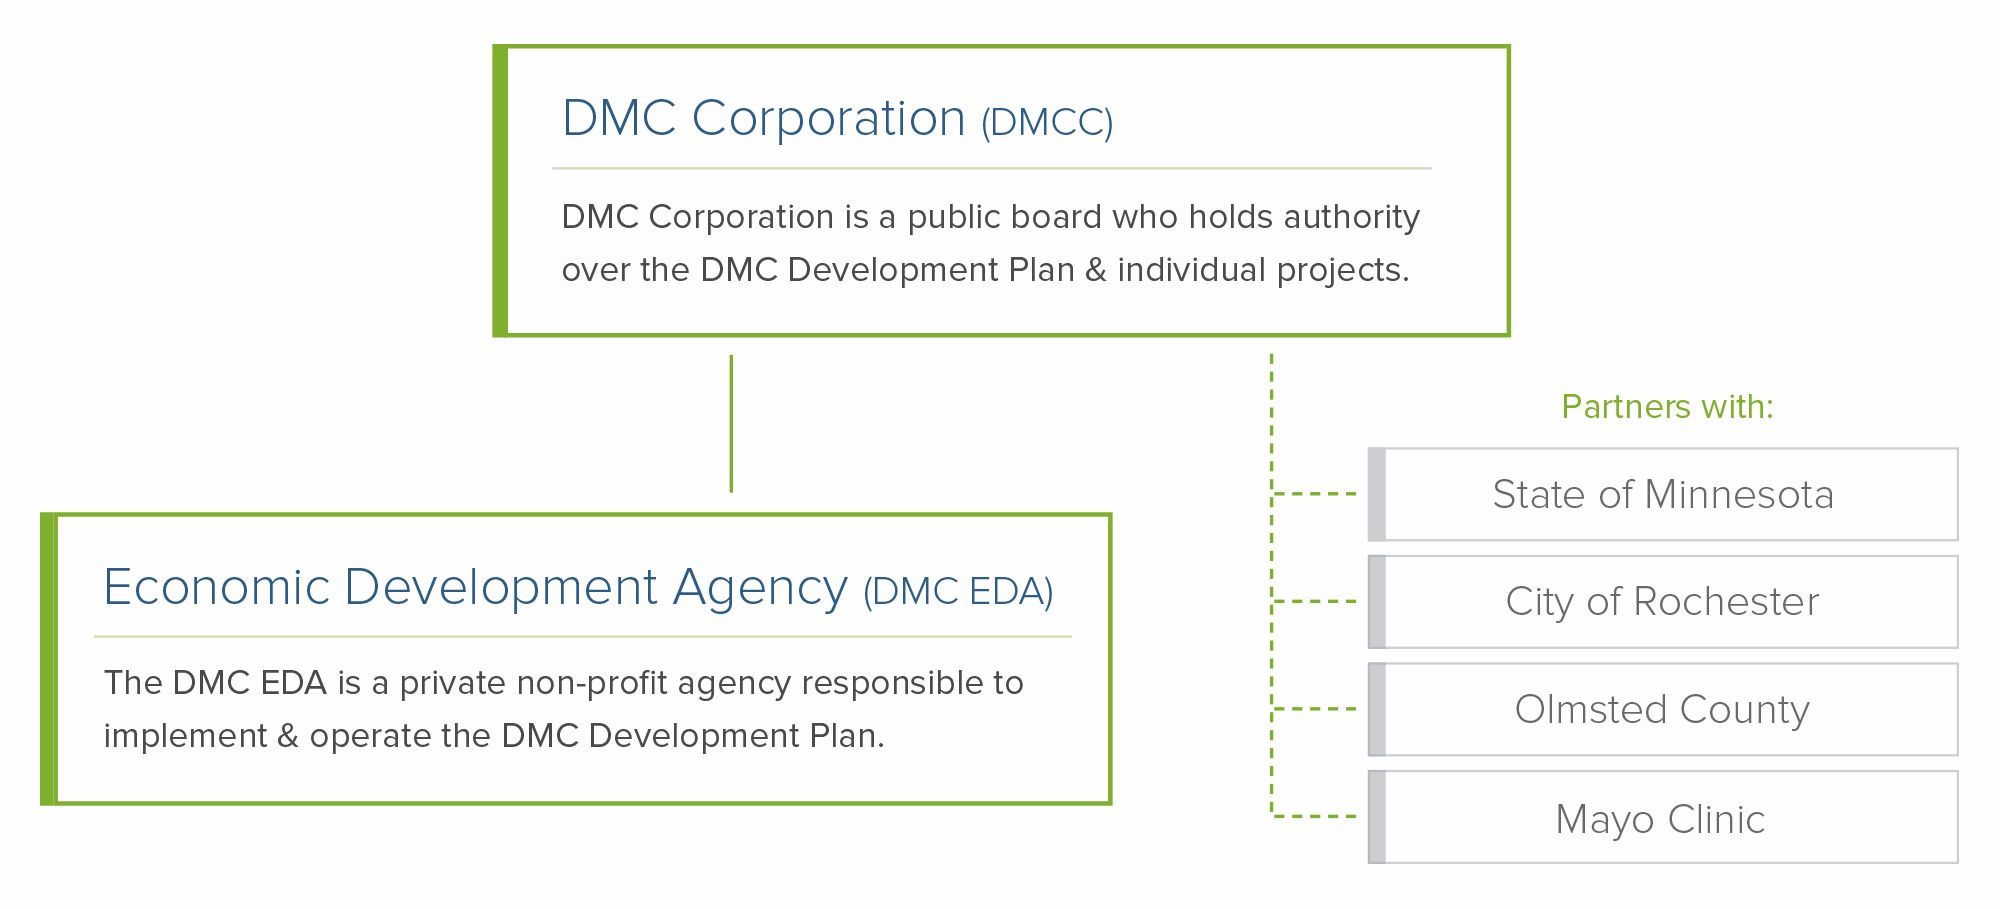 Diagram showing the DMC and the DMC EDA and how the DMC Corporation Partners with the State of Minnesota, City of Rochester, Olmstead County, and the Mayo Clinic 
 DMC Corporation (Destination Medical Center Corporation) is a public board who holds authority over the DMC Development Plan and individual projects. 
 The The DMC EDA (Economic Development Agency) is a private non-profit agency responsible to implement and operate the DMC Development Plan.